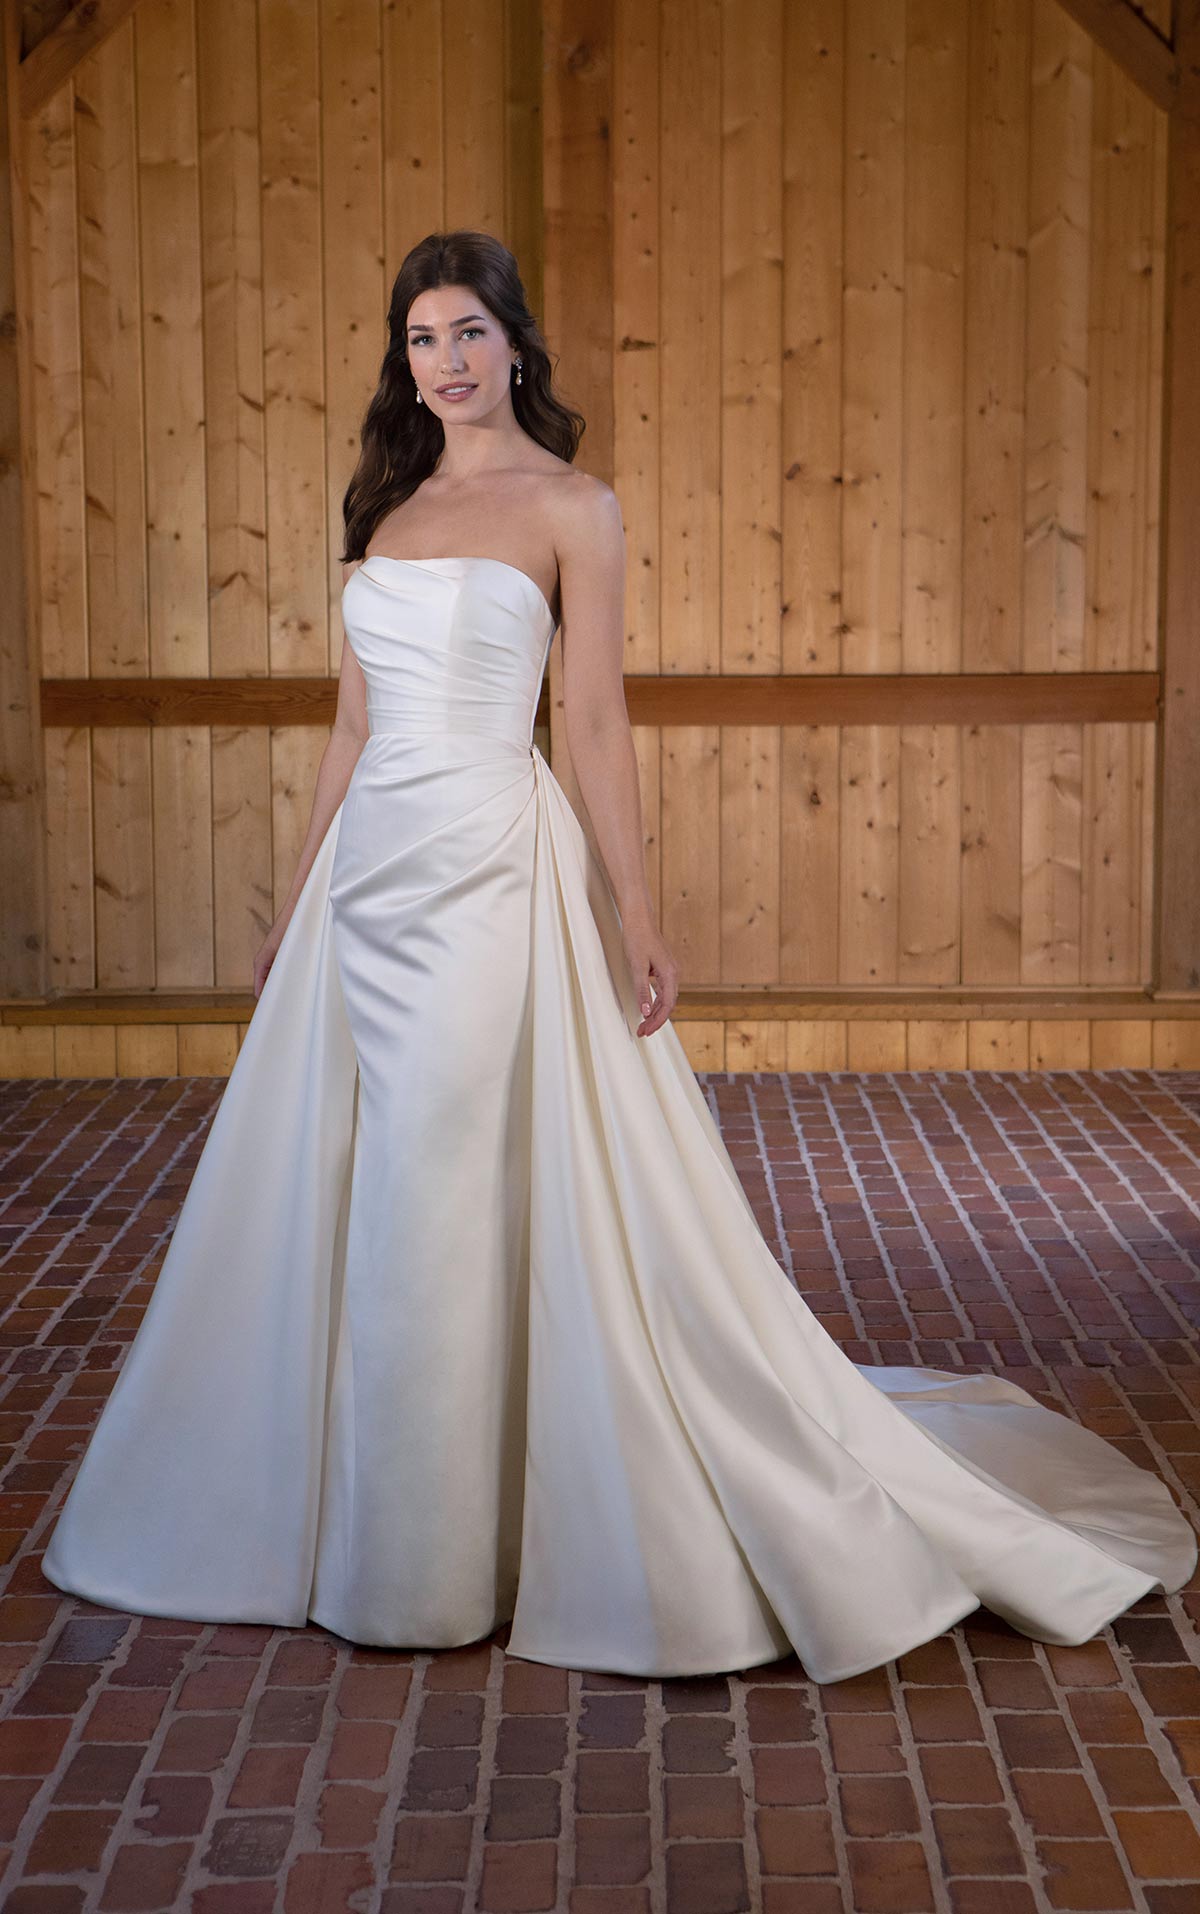 Hand Made Wedding Gown 2019 With Removable Skirt, Detachable Train, Plus V  Neck, And Sleeveless Design In Sizes 2 18 From Toysmith, $250.26 |  DHgate.Com